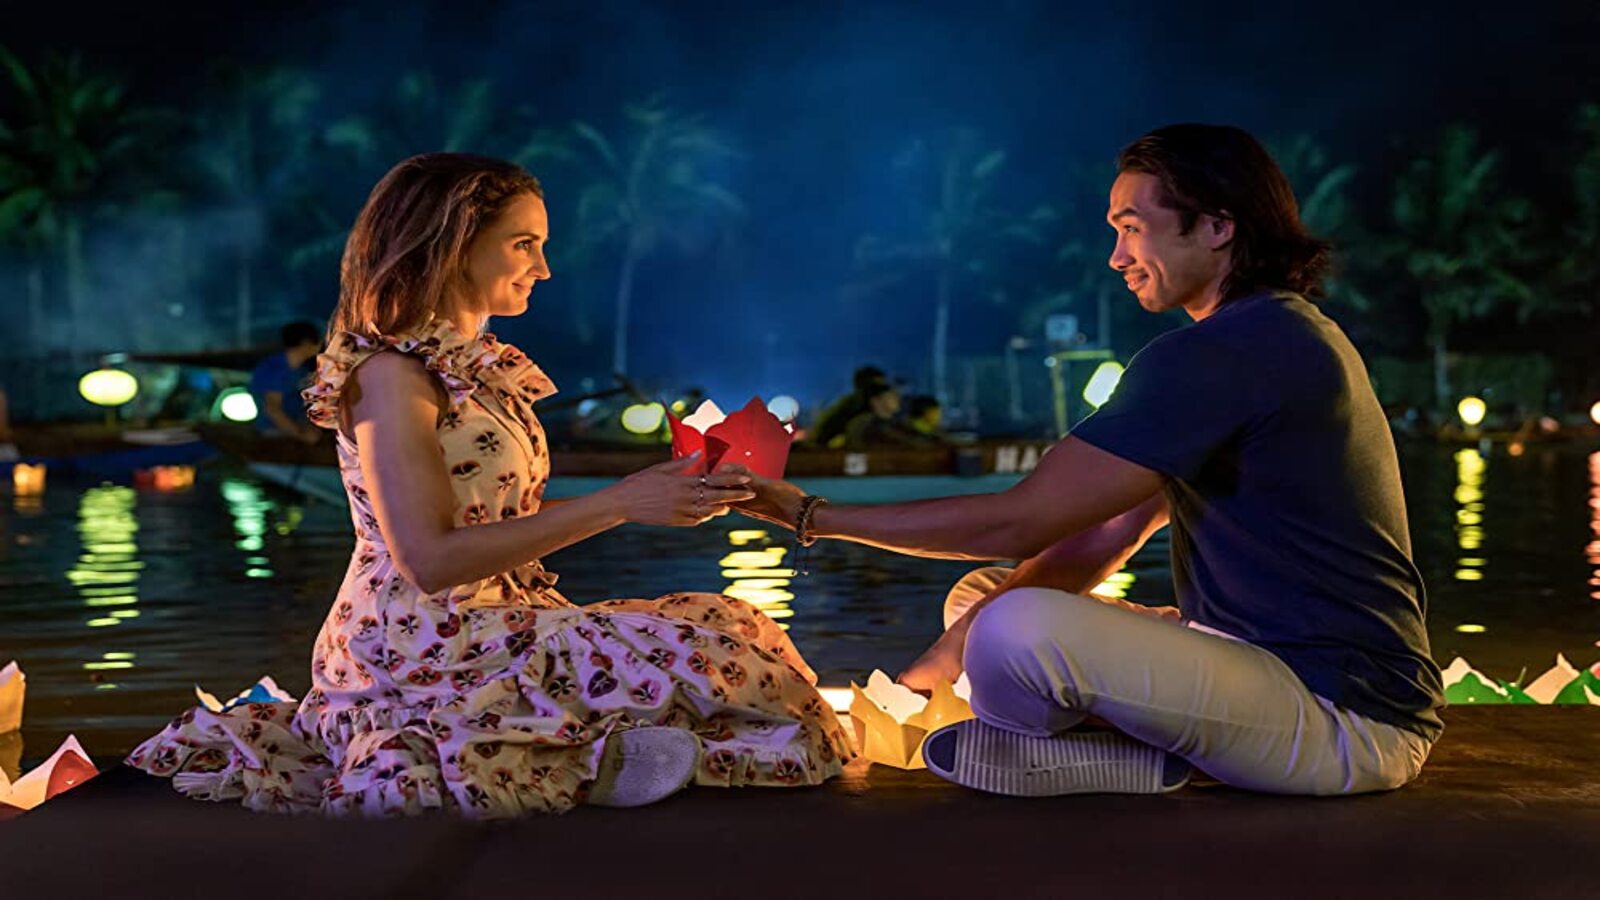 A Tourist's Guide to Love, let's go on an adventure with Rachael Leigh Cook in the Netflix rom-com trailer